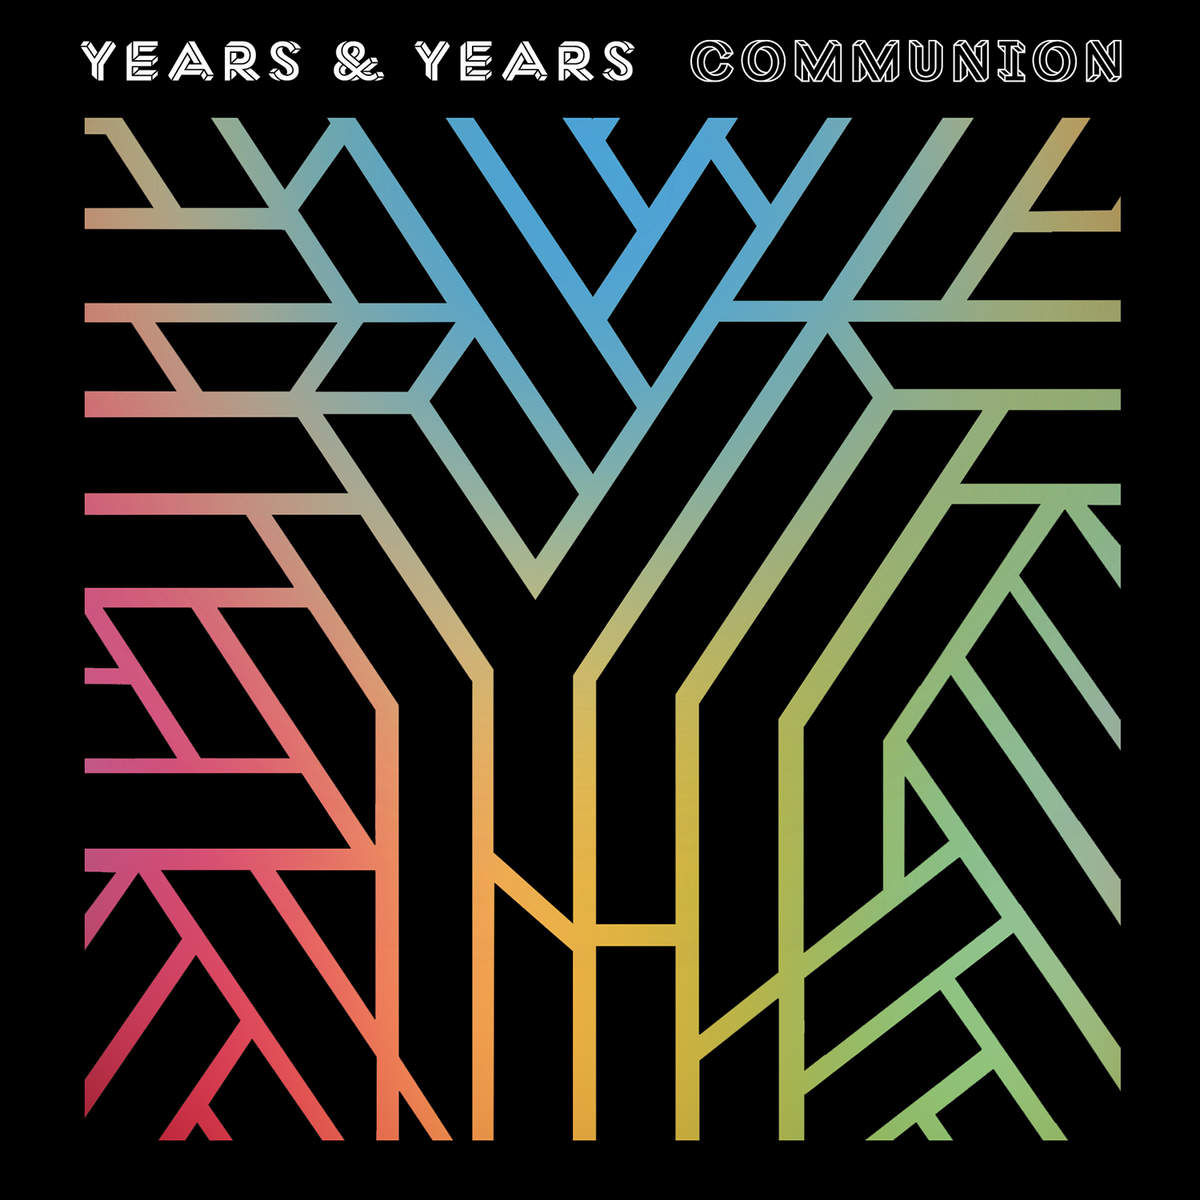 years-years-communion.png?width=500&heig